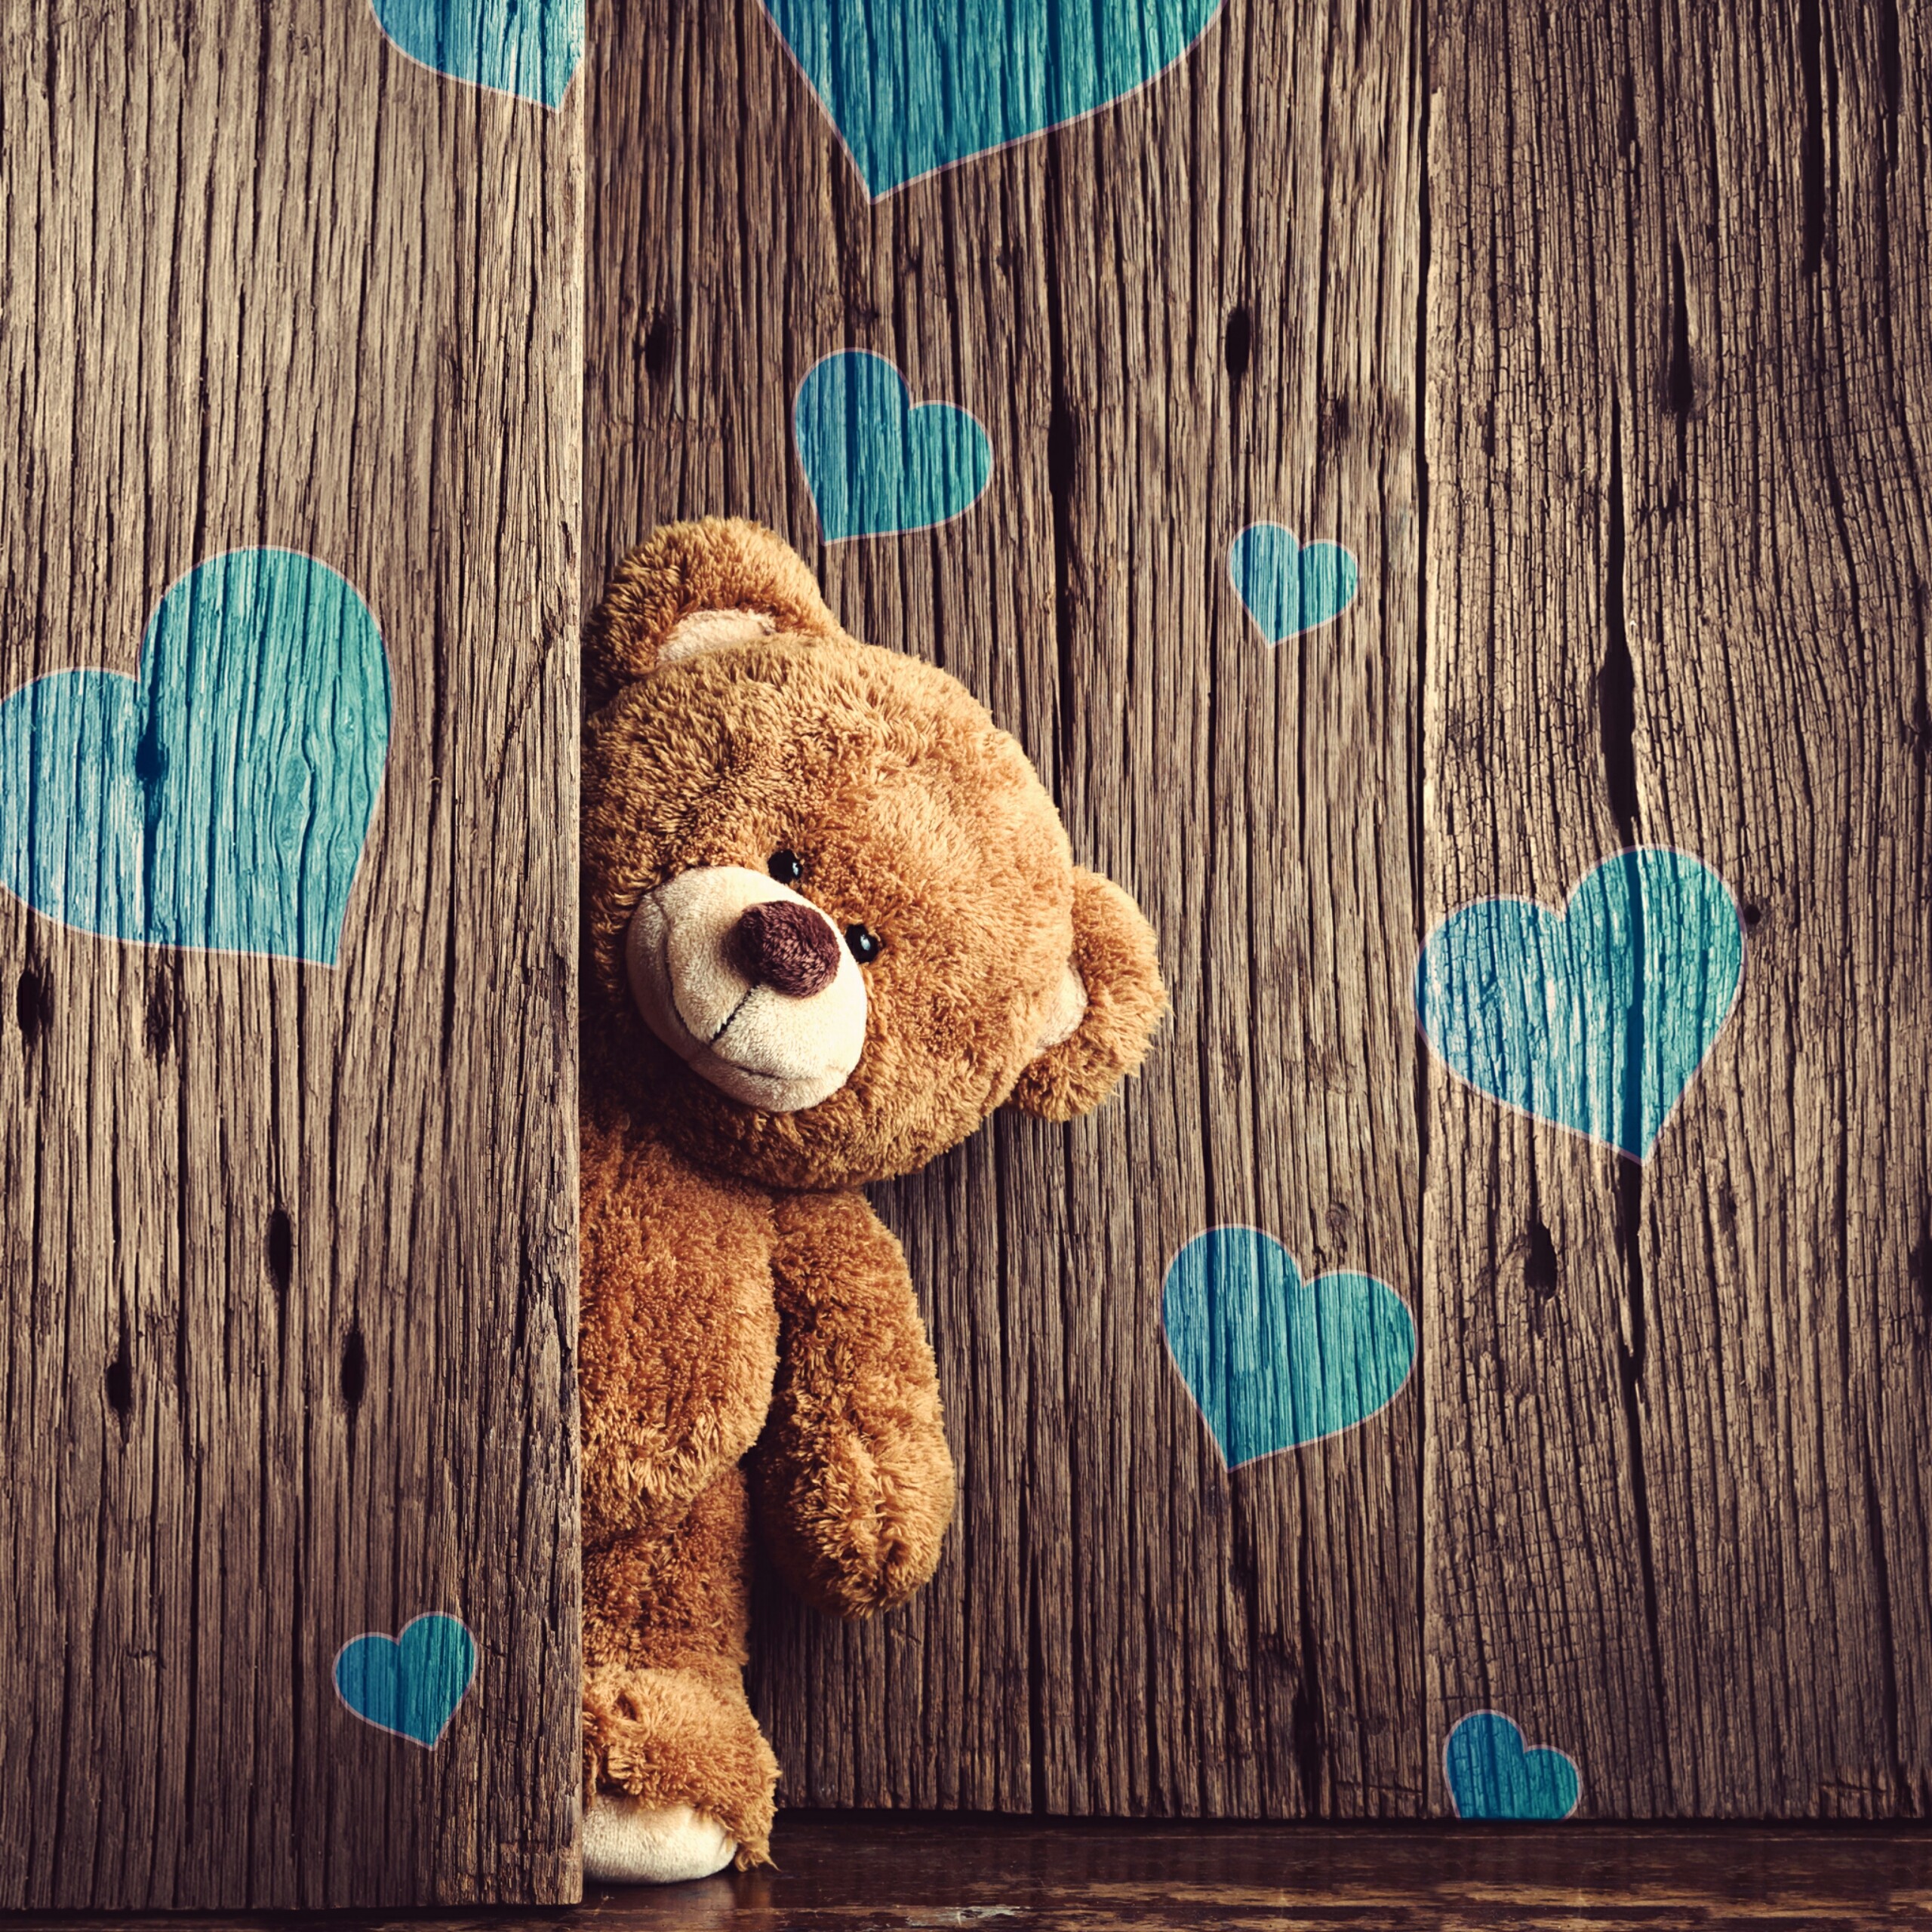 Amazing Cool Wallpapers Hd Wallpapers Backgrounds Images - Blue Teddy Bear Backgrounds - HD Wallpaper 